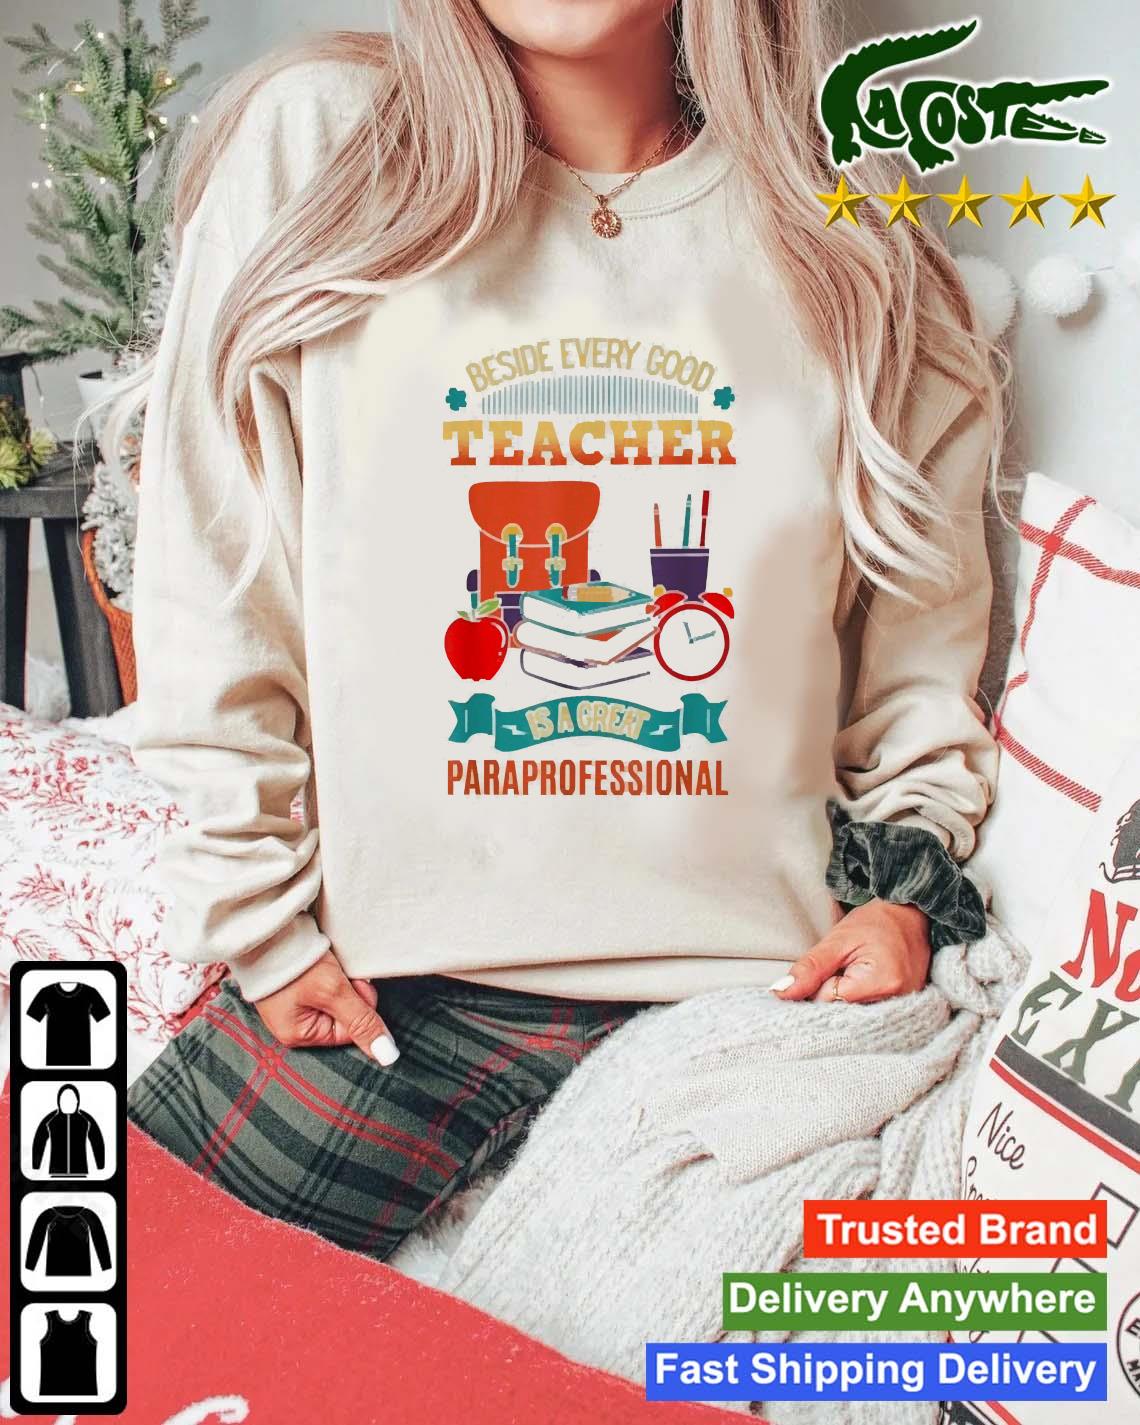 Beside Every Teacher Is A Great Paraprofessional Sweats Mockup Sweater